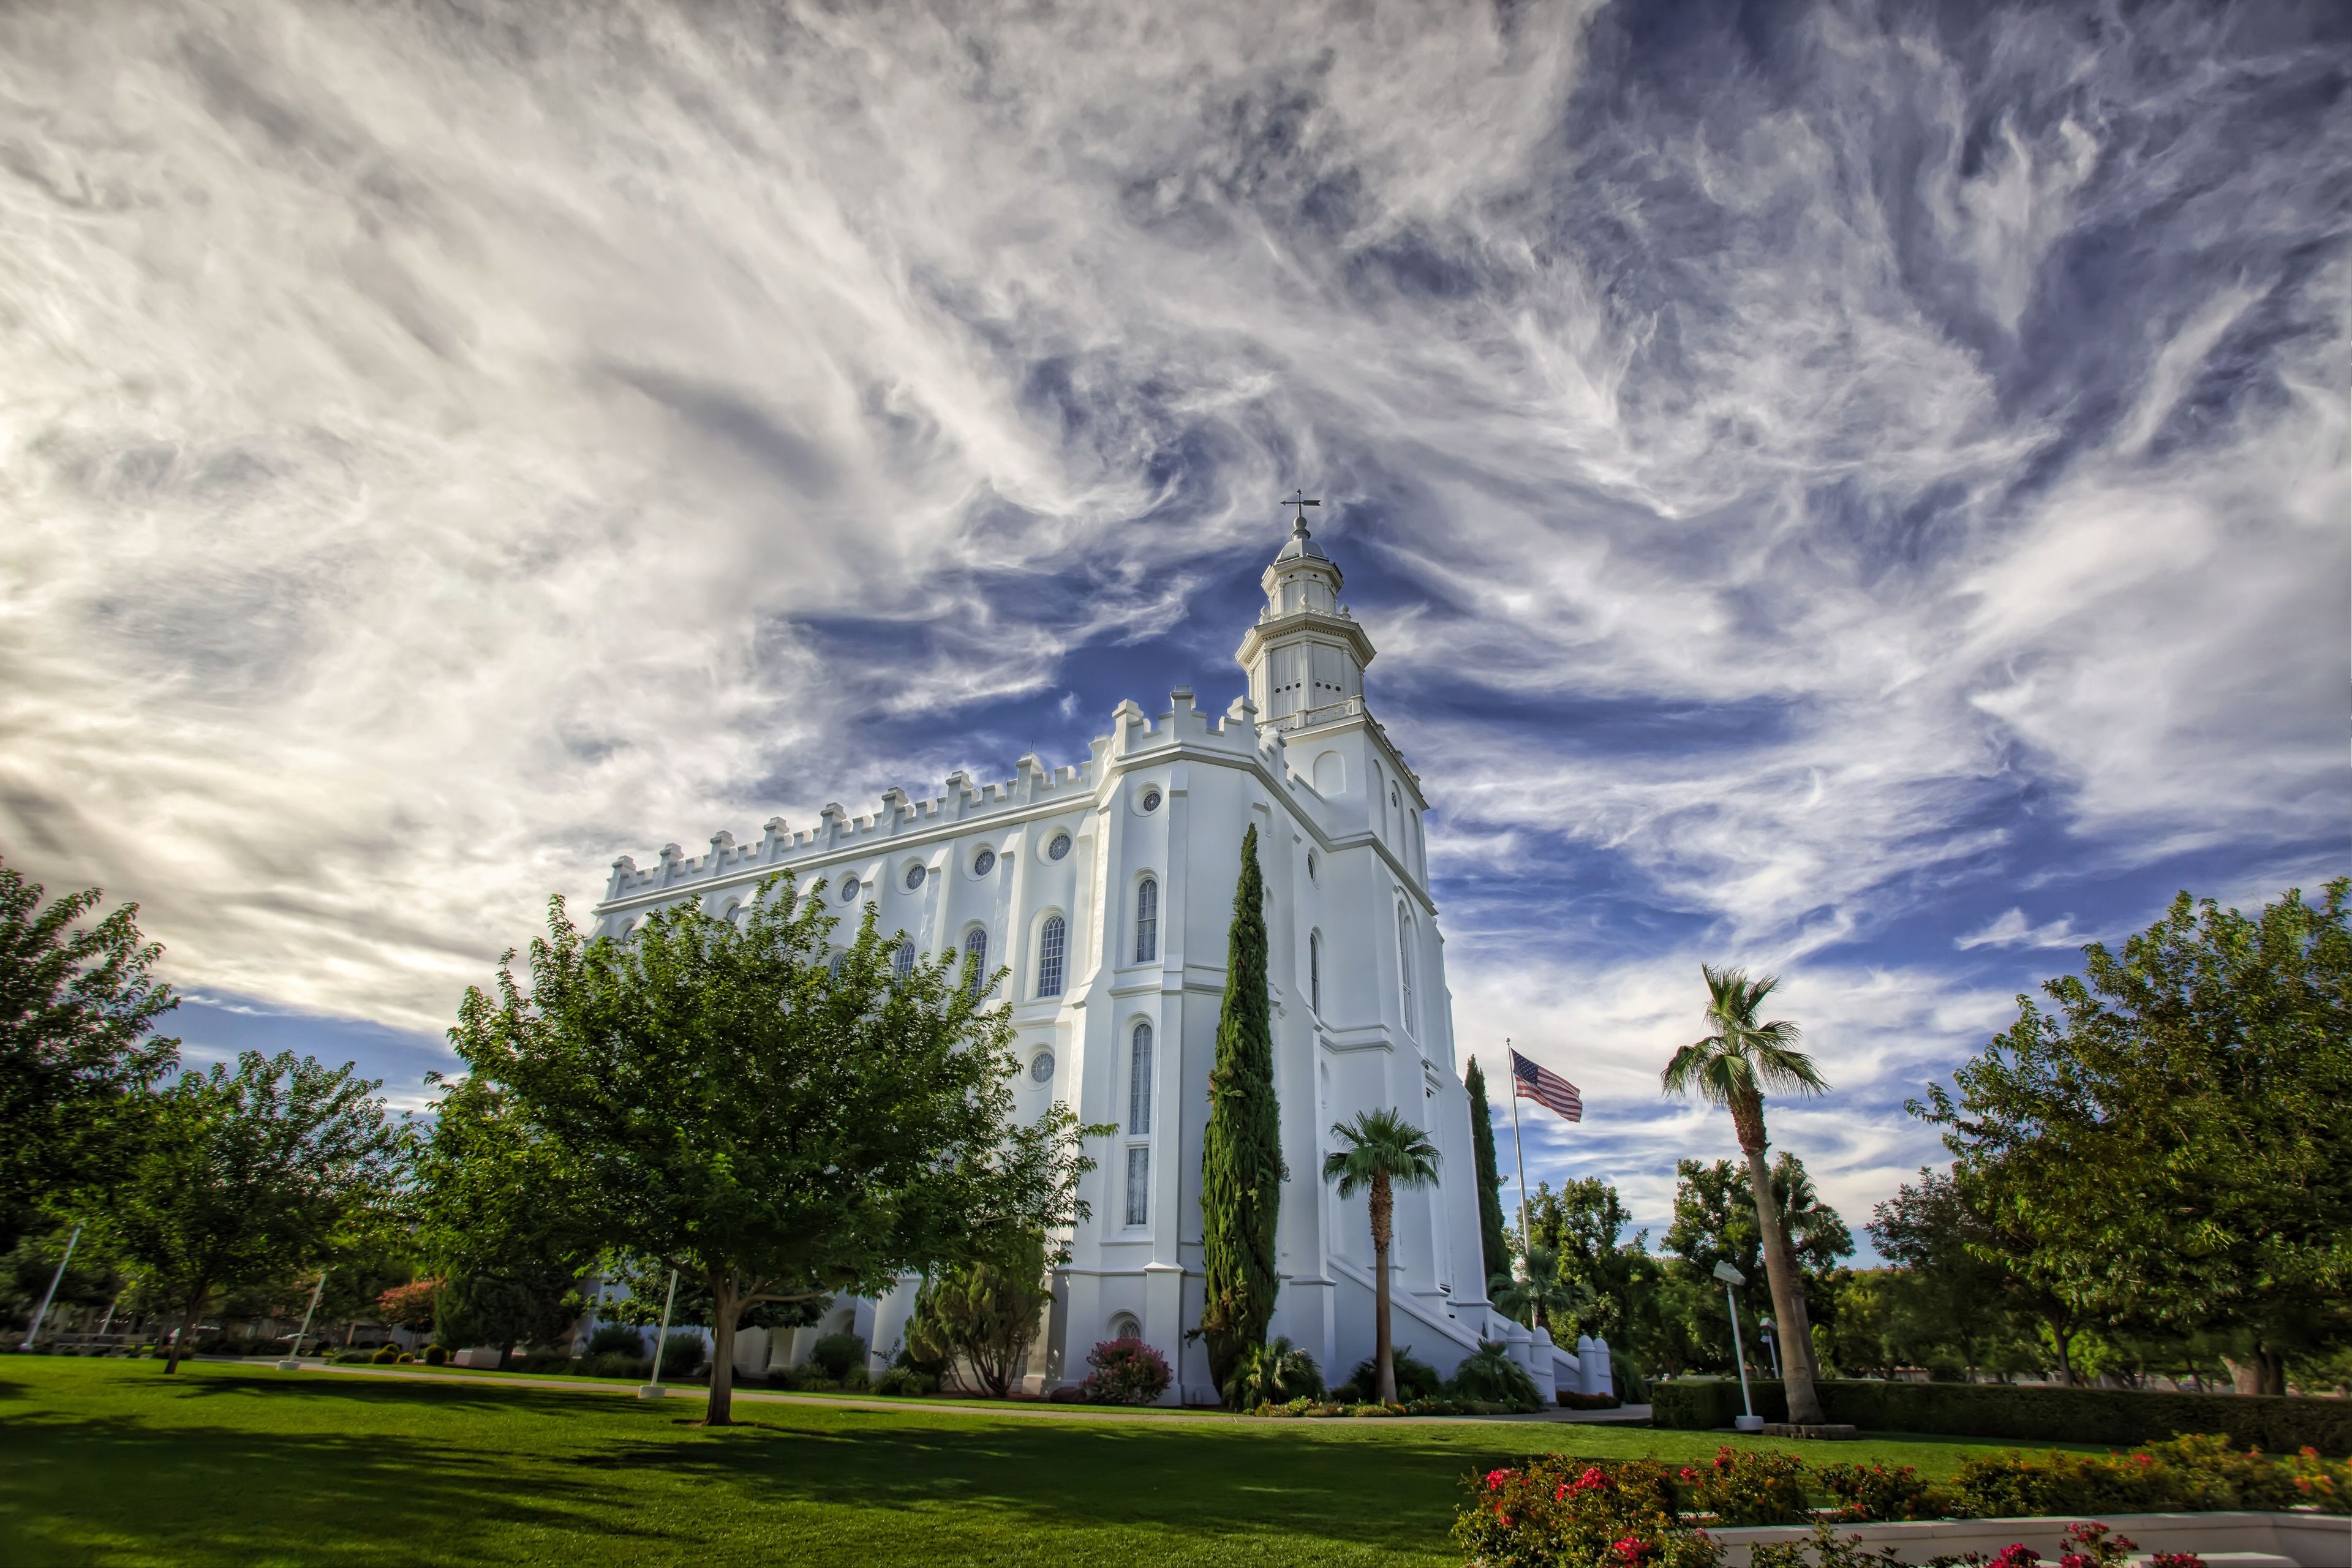 The St. George Utah Temple in daylight, including the entrance and scenery.